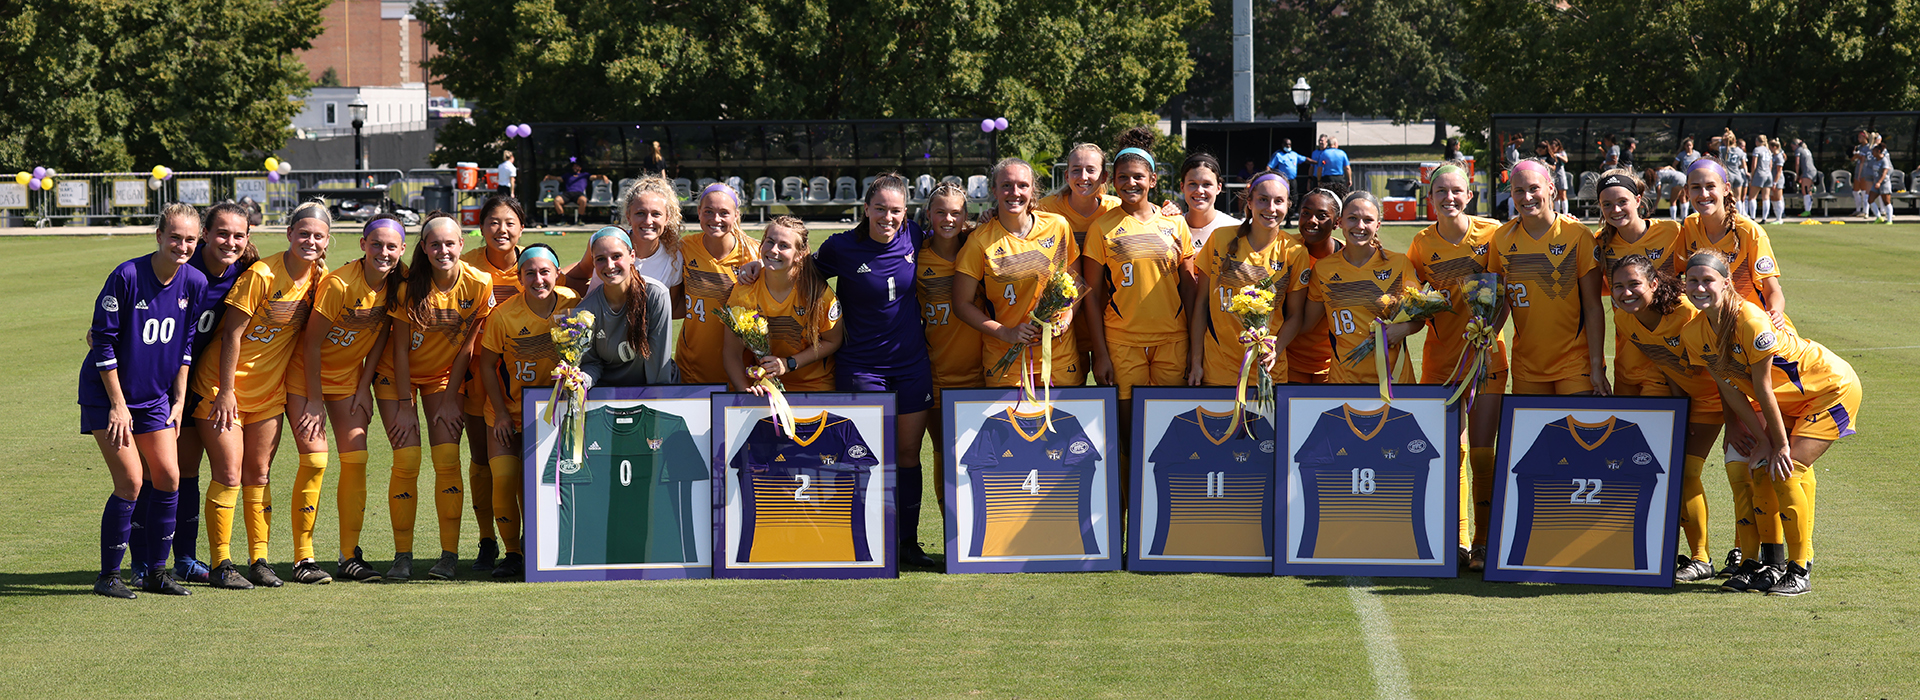 Smith’s penalty kick score leads Tech to double overtime win on Senior Day